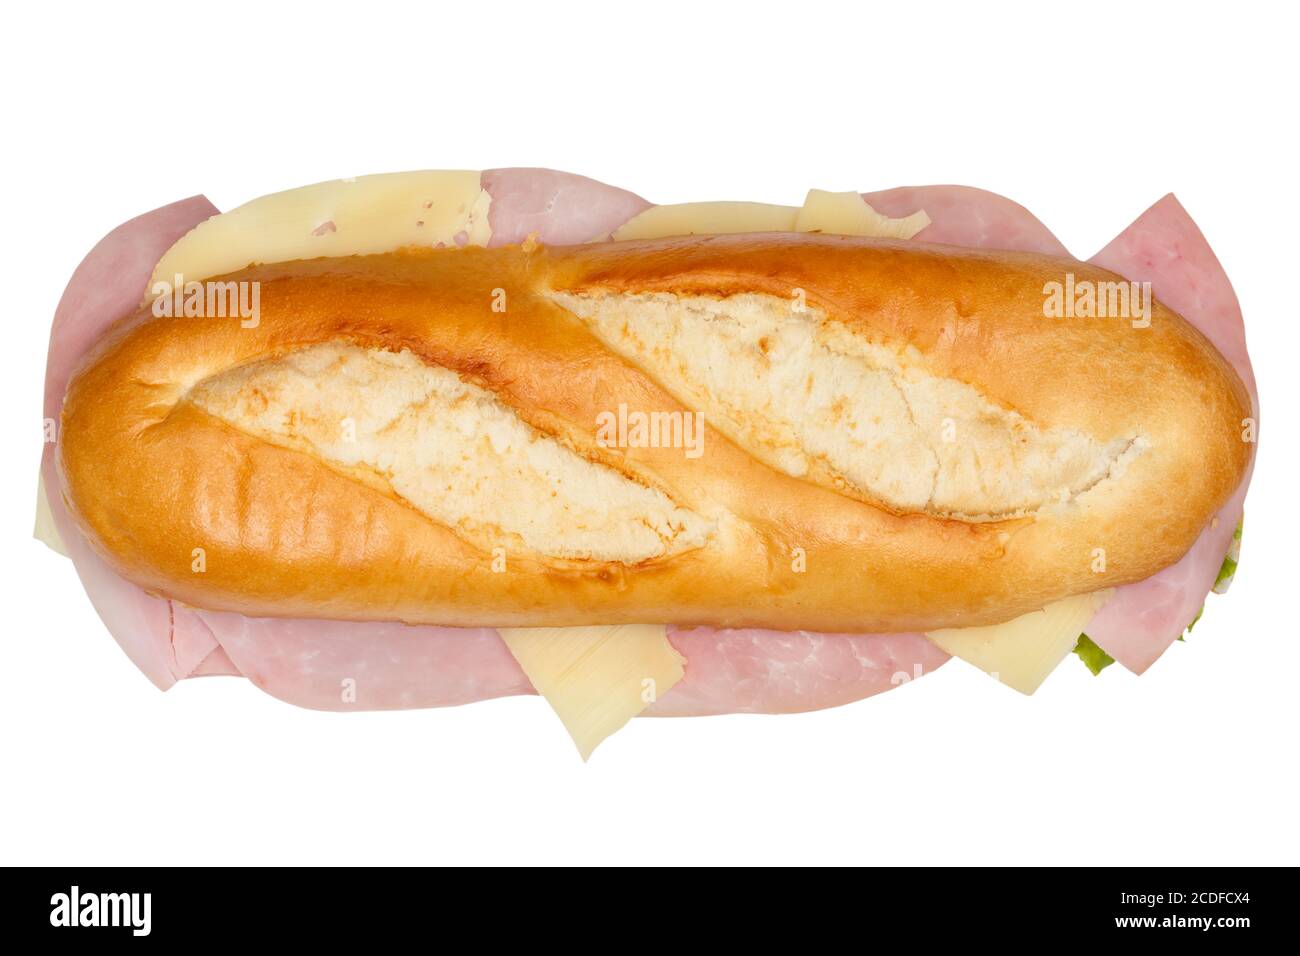 Baguette sub sandwich with ham and cheese from above isolated on a white background Stock Photo